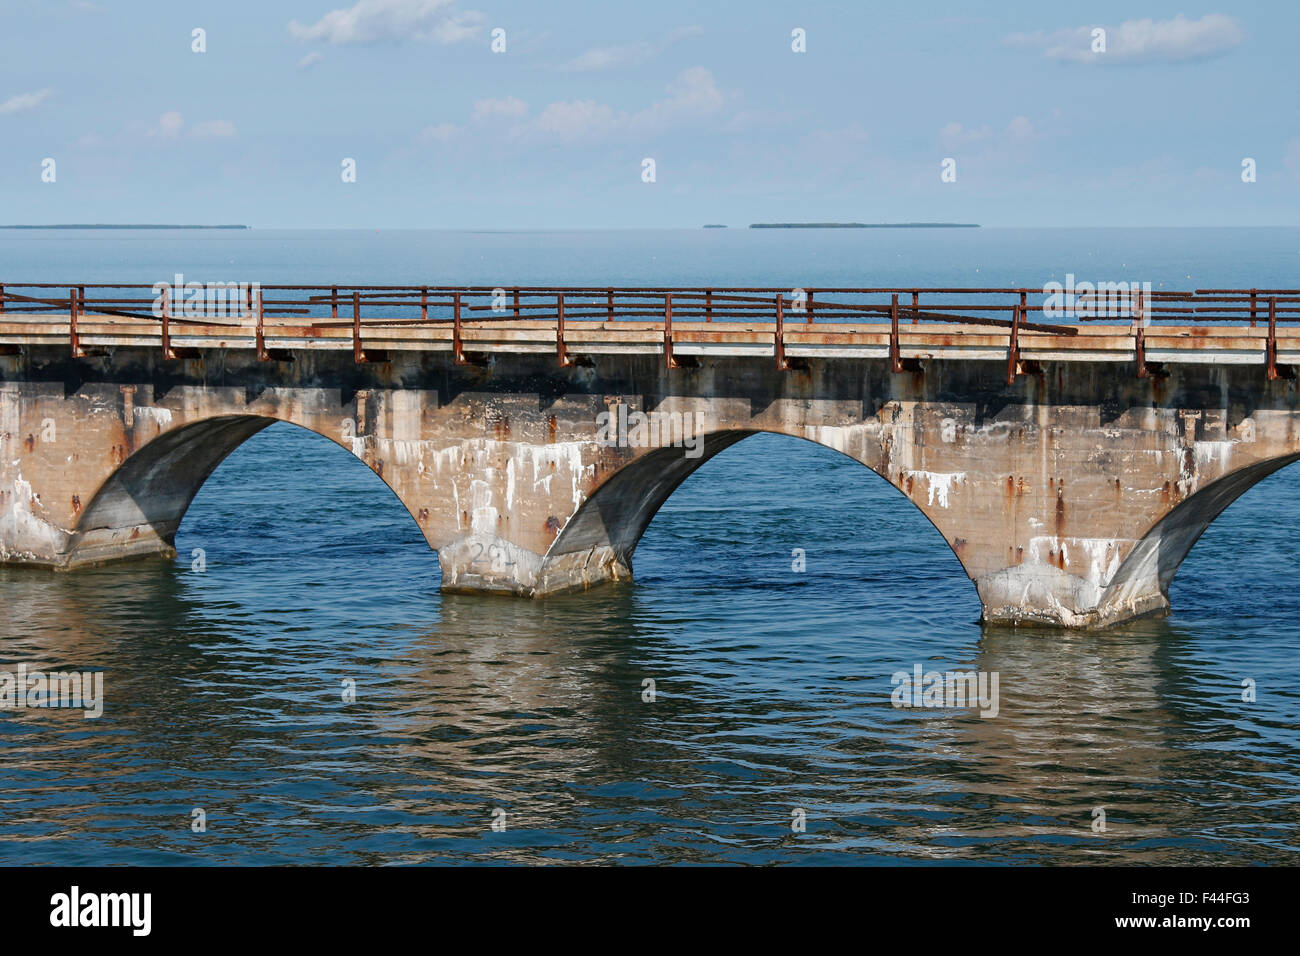 The original, historic 'Overseas Railroad' bridges in the Florida Keys built by Henry Flagler in the early 1900s Stock Photo